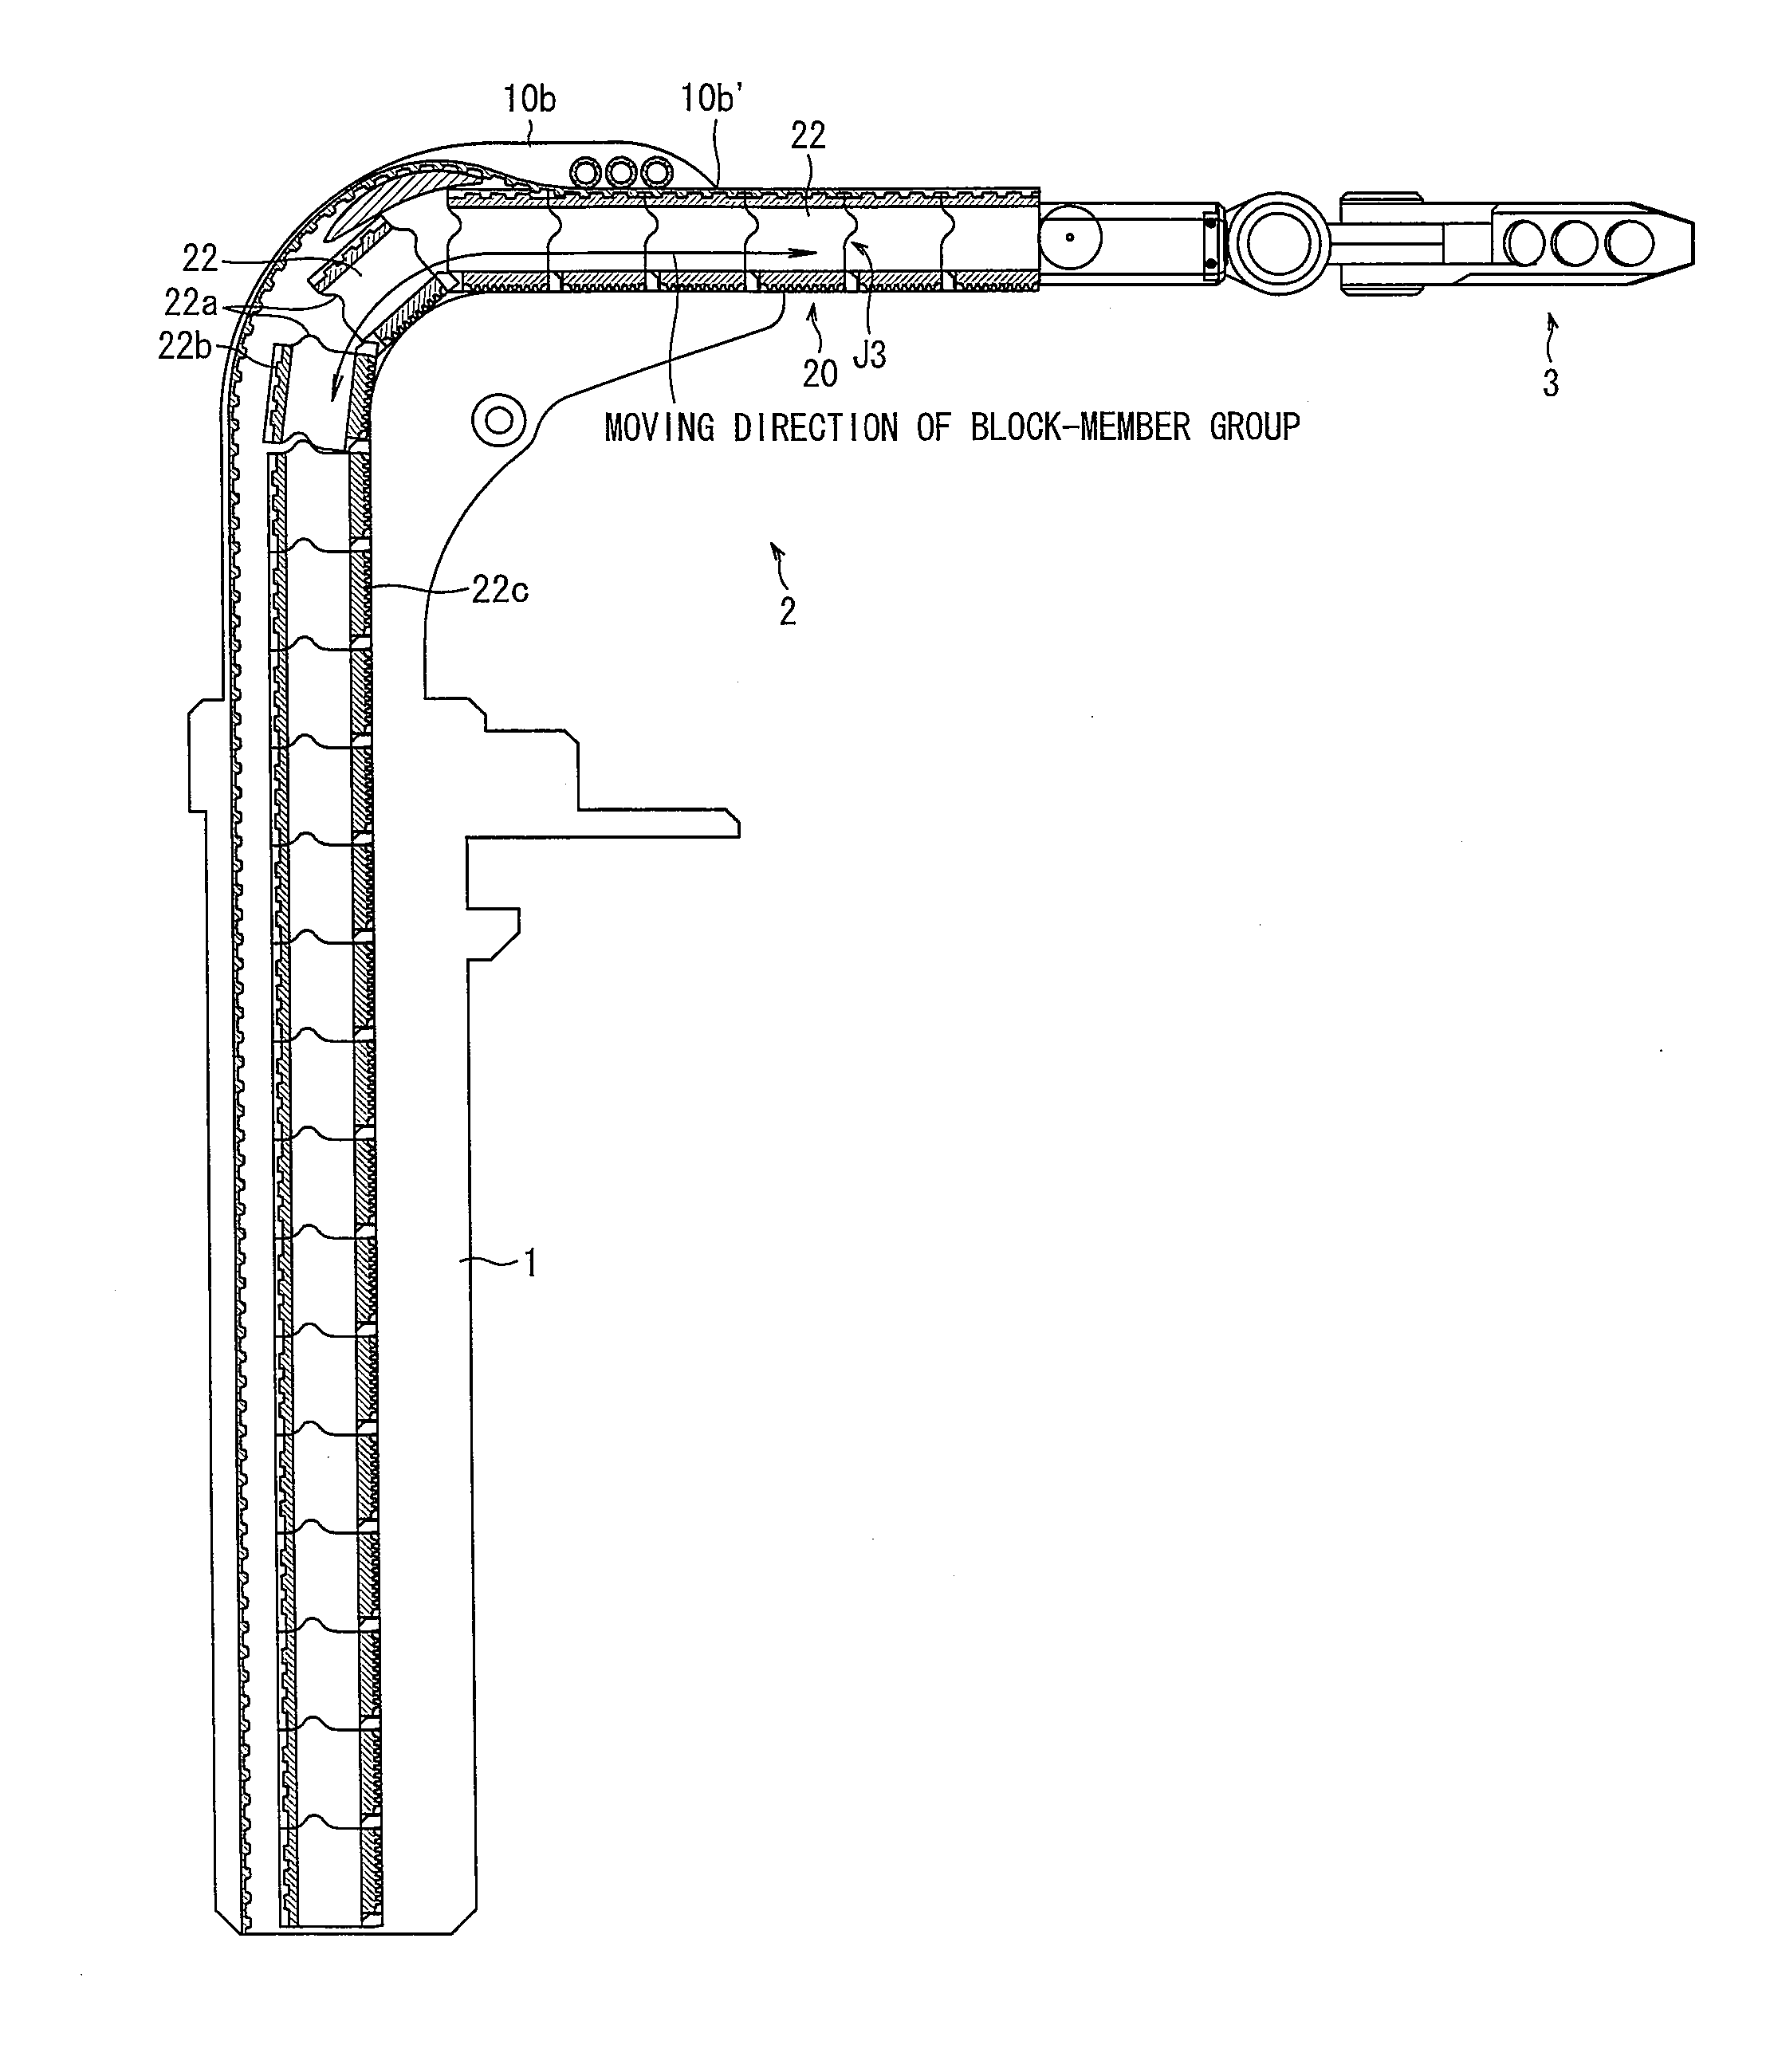 Linear-motion telescopic mechanism and robot arm having linear-motion telescopic mechanism